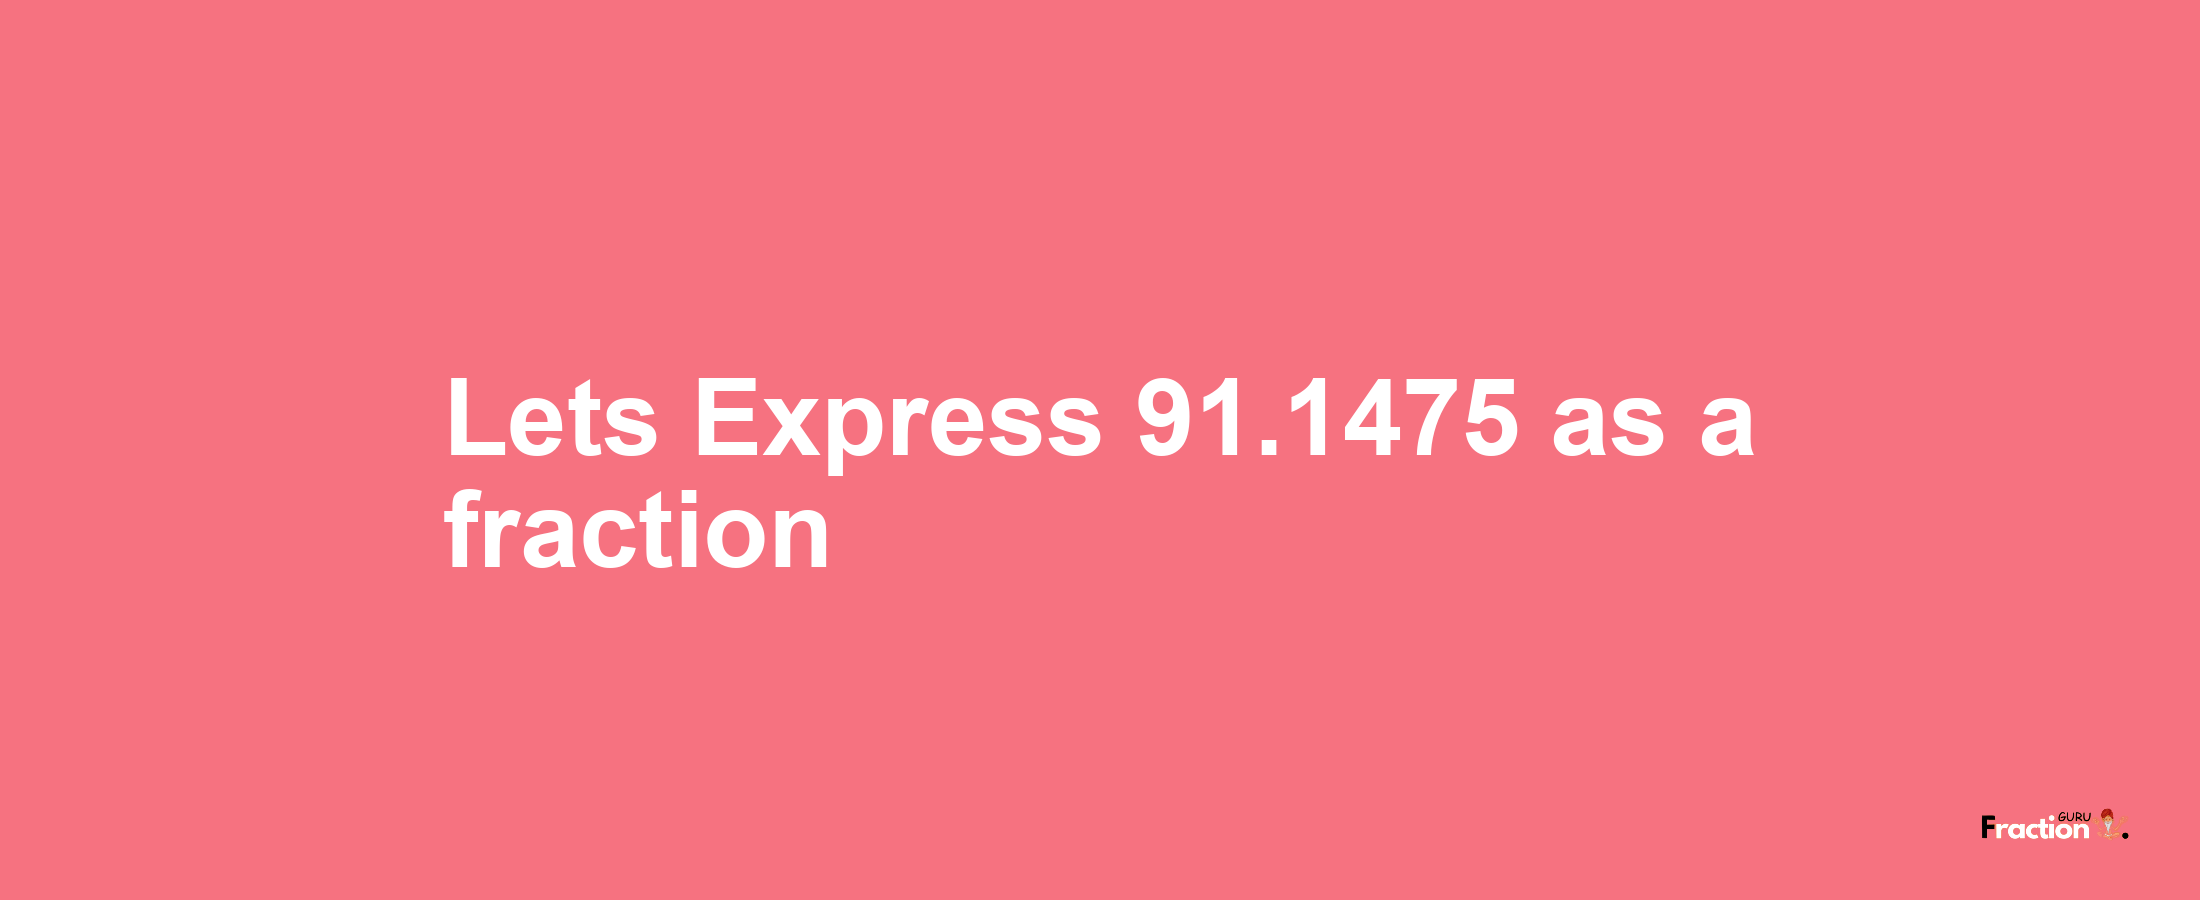 Lets Express 91.1475 as afraction